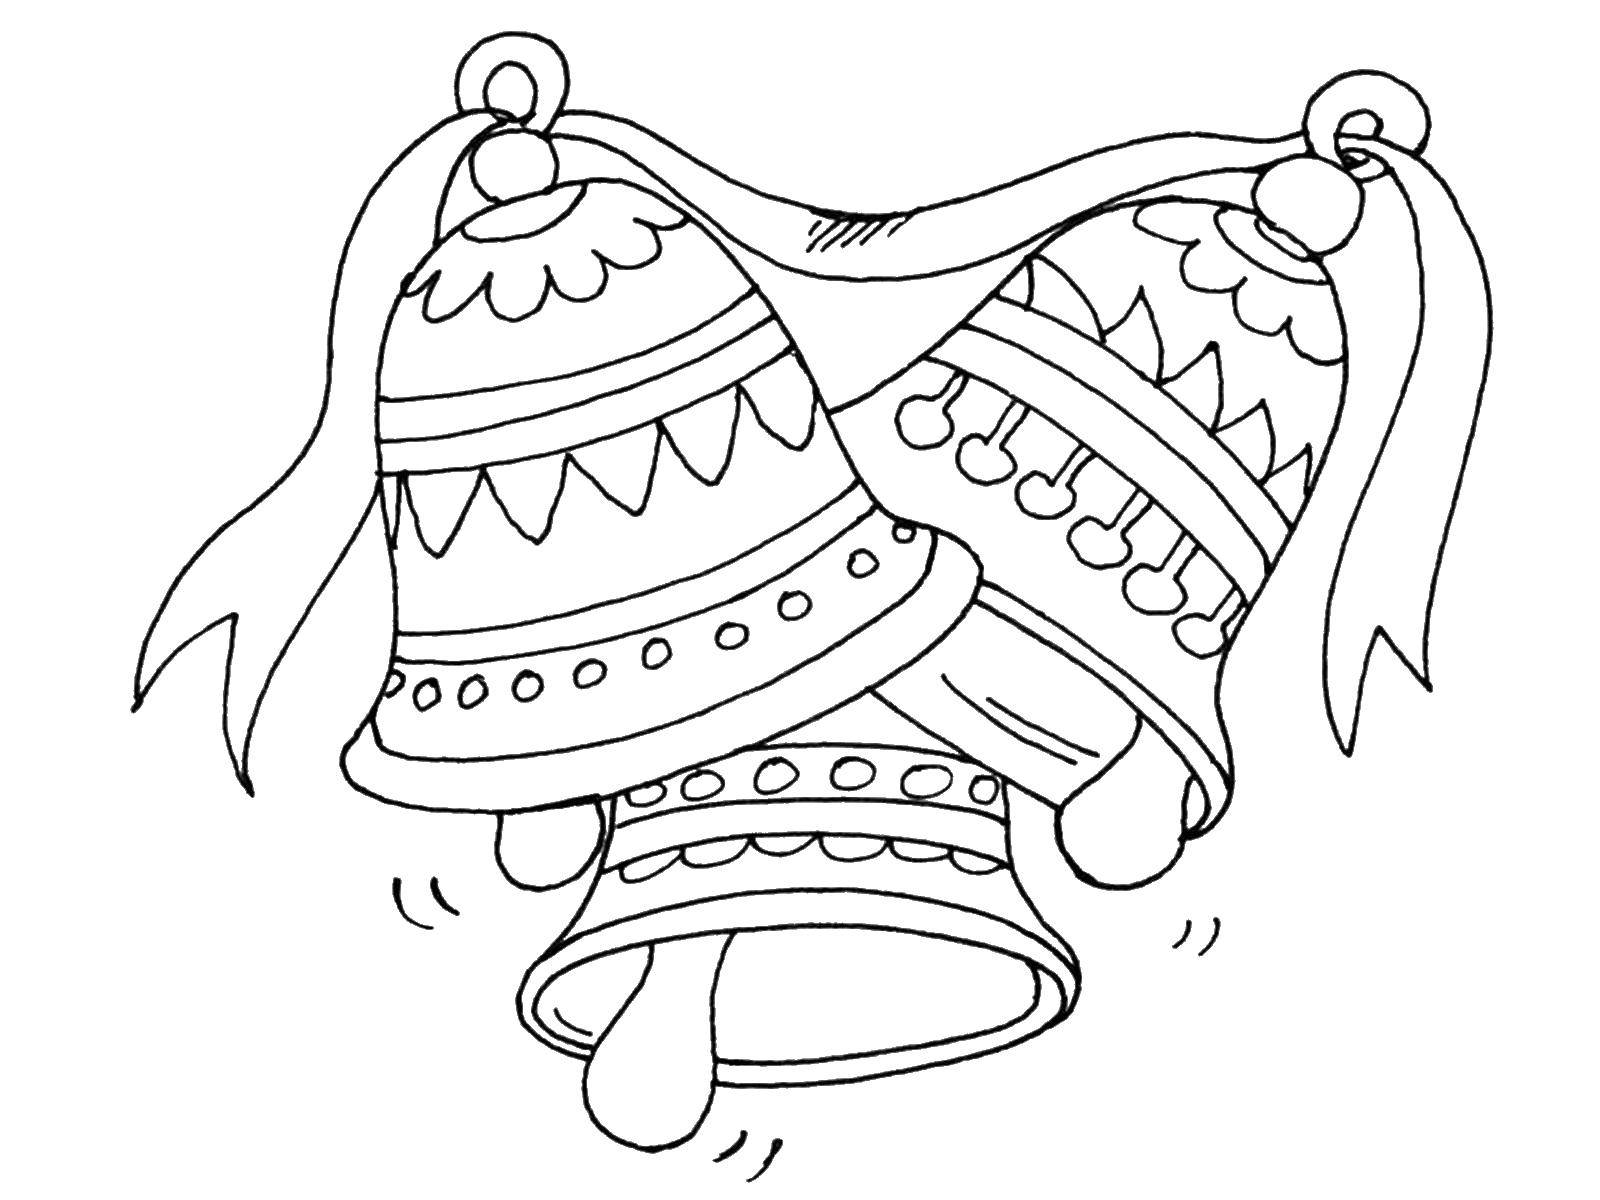 Coloring 3 bell. Category the bell. Tags:  bells , ringing.